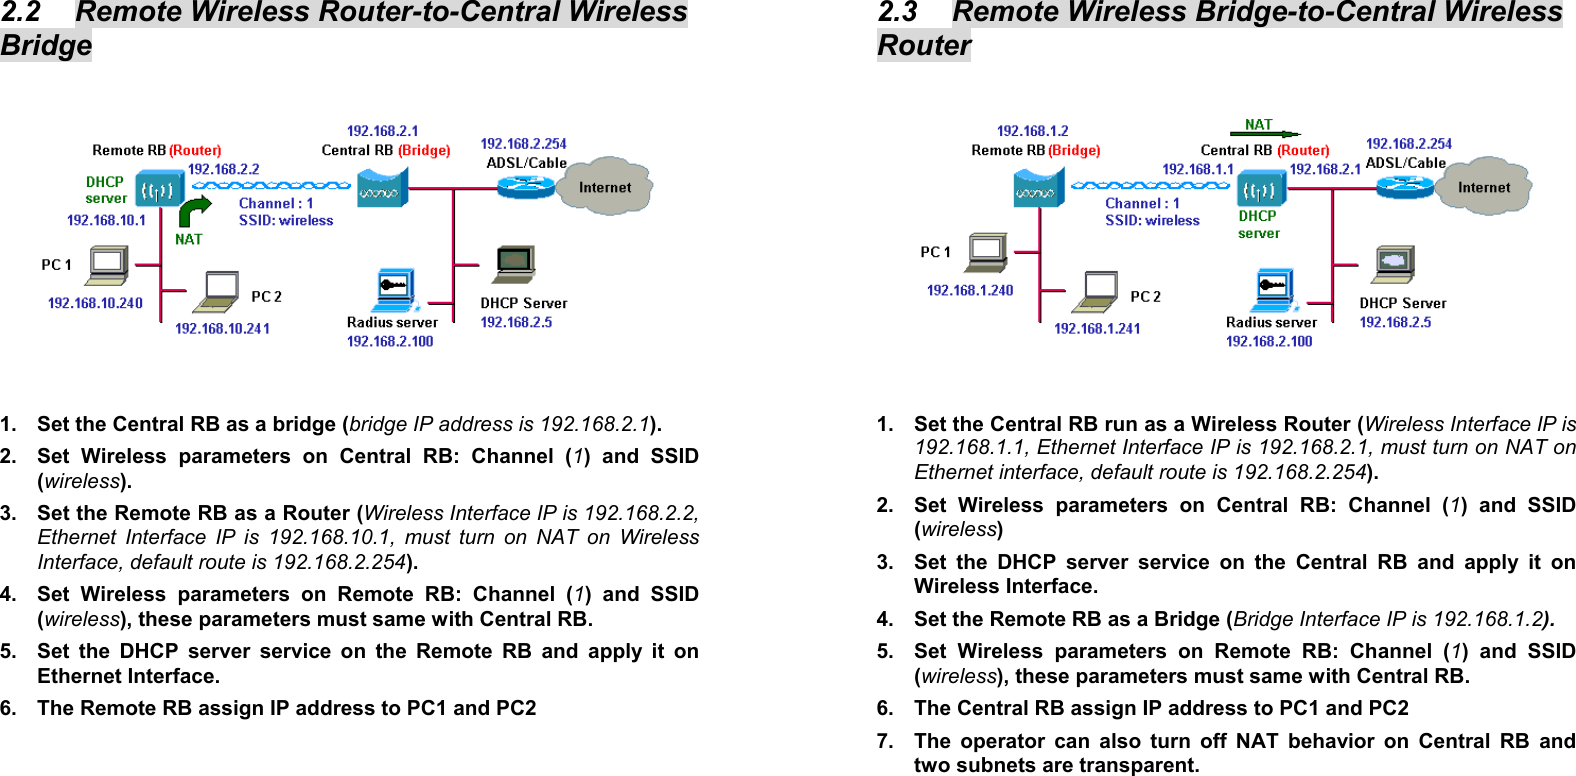 10 2.2  Remote Wireless Router-to-Central Wireless Bridge  1.  Set the Central RB as a bridge (bridge IP address is 192.168.2.1). 2.  Set Wireless parameters on Central RB: Channel (1) and SSID (wireless). 3.  Set the Remote RB as a Router (Wireless Interface IP is 192.168.2.2, Ethernet Interface IP is 192.168.10.1, must turn on NAT on Wireless Interface, default route is 192.168.2.254). 4.  Set Wireless parameters on Remote RB: Channel (1) and SSID (wireless), these parameters must same with Central RB. 5.  Set the DHCP server service on the Remote RB and apply it on Ethernet Interface. 6.  The Remote RB assign IP address to PC1 and PC2    11 2.3  Remote Wireless Bridge-to-Central Wireless Router  1.  Set the Central RB run as a Wireless Router (Wireless Interface IP is 192.168.1.1, Ethernet Interface IP is 192.168.2.1, must turn on NAT on Ethernet interface, default route is 192.168.2.254). 2.  Set Wireless parameters on Central RB: Channel (1) and SSID (wireless) 3.  Set the DHCP server service on the Central RB and apply it on Wireless Interface. 4.  Set the Remote RB as a Bridge (Bridge Interface IP is 192.168.1.2).  5.  Set Wireless parameters on Remote RB: Channel (1) and SSID (wireless), these parameters must same with Central RB. 6.  The Central RB assign IP address to PC1 and PC2 7.  The operator can also turn off NAT behavior on Central RB and two subnets are transparent.         